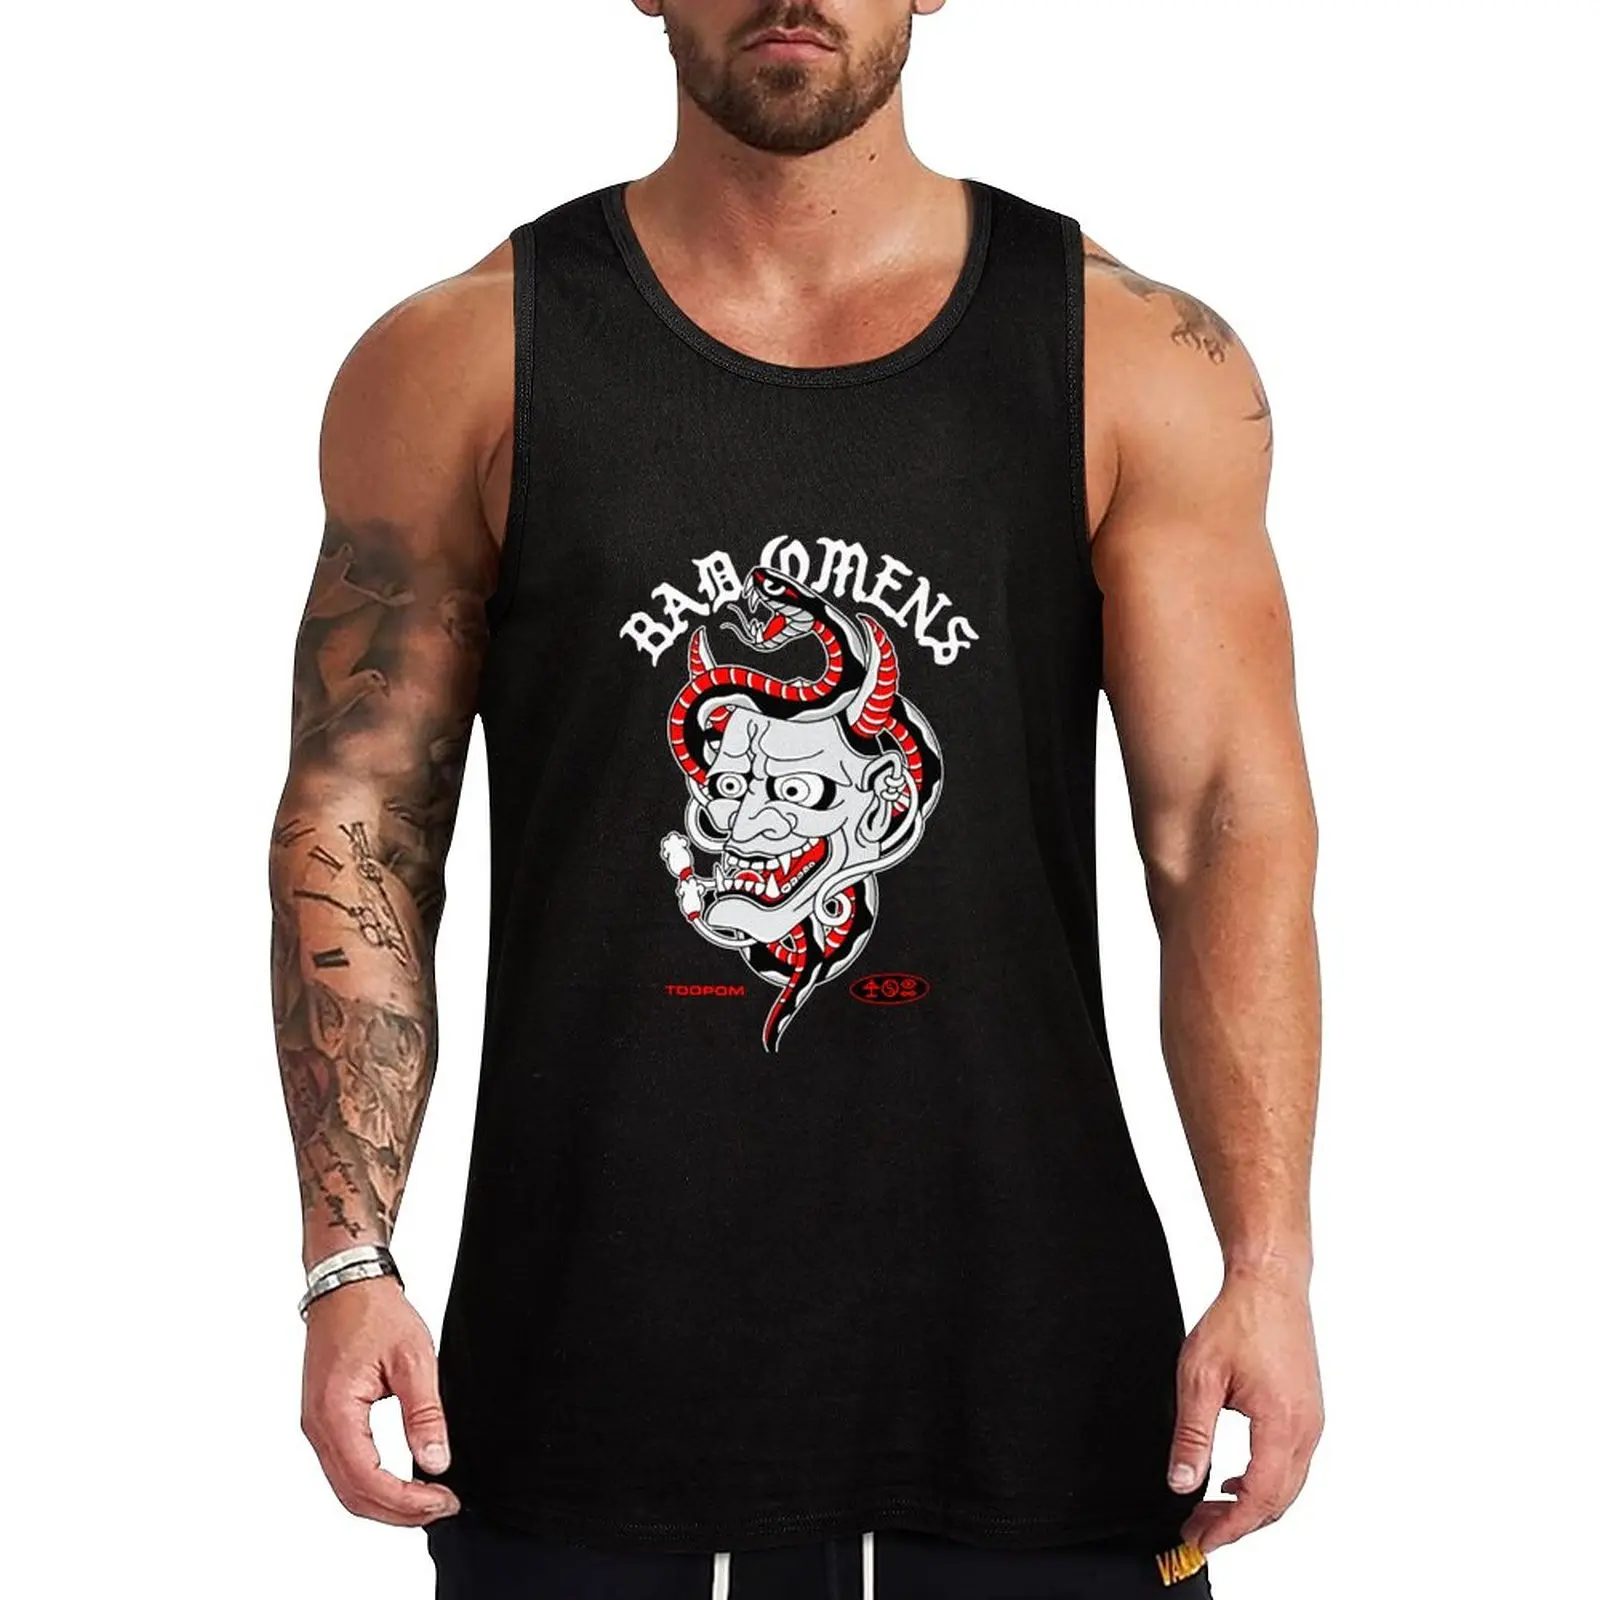 

New The Most Popular Of Bad Omens is an Metalcore Tank Top T-shirts men best selling products Men's clothing brands